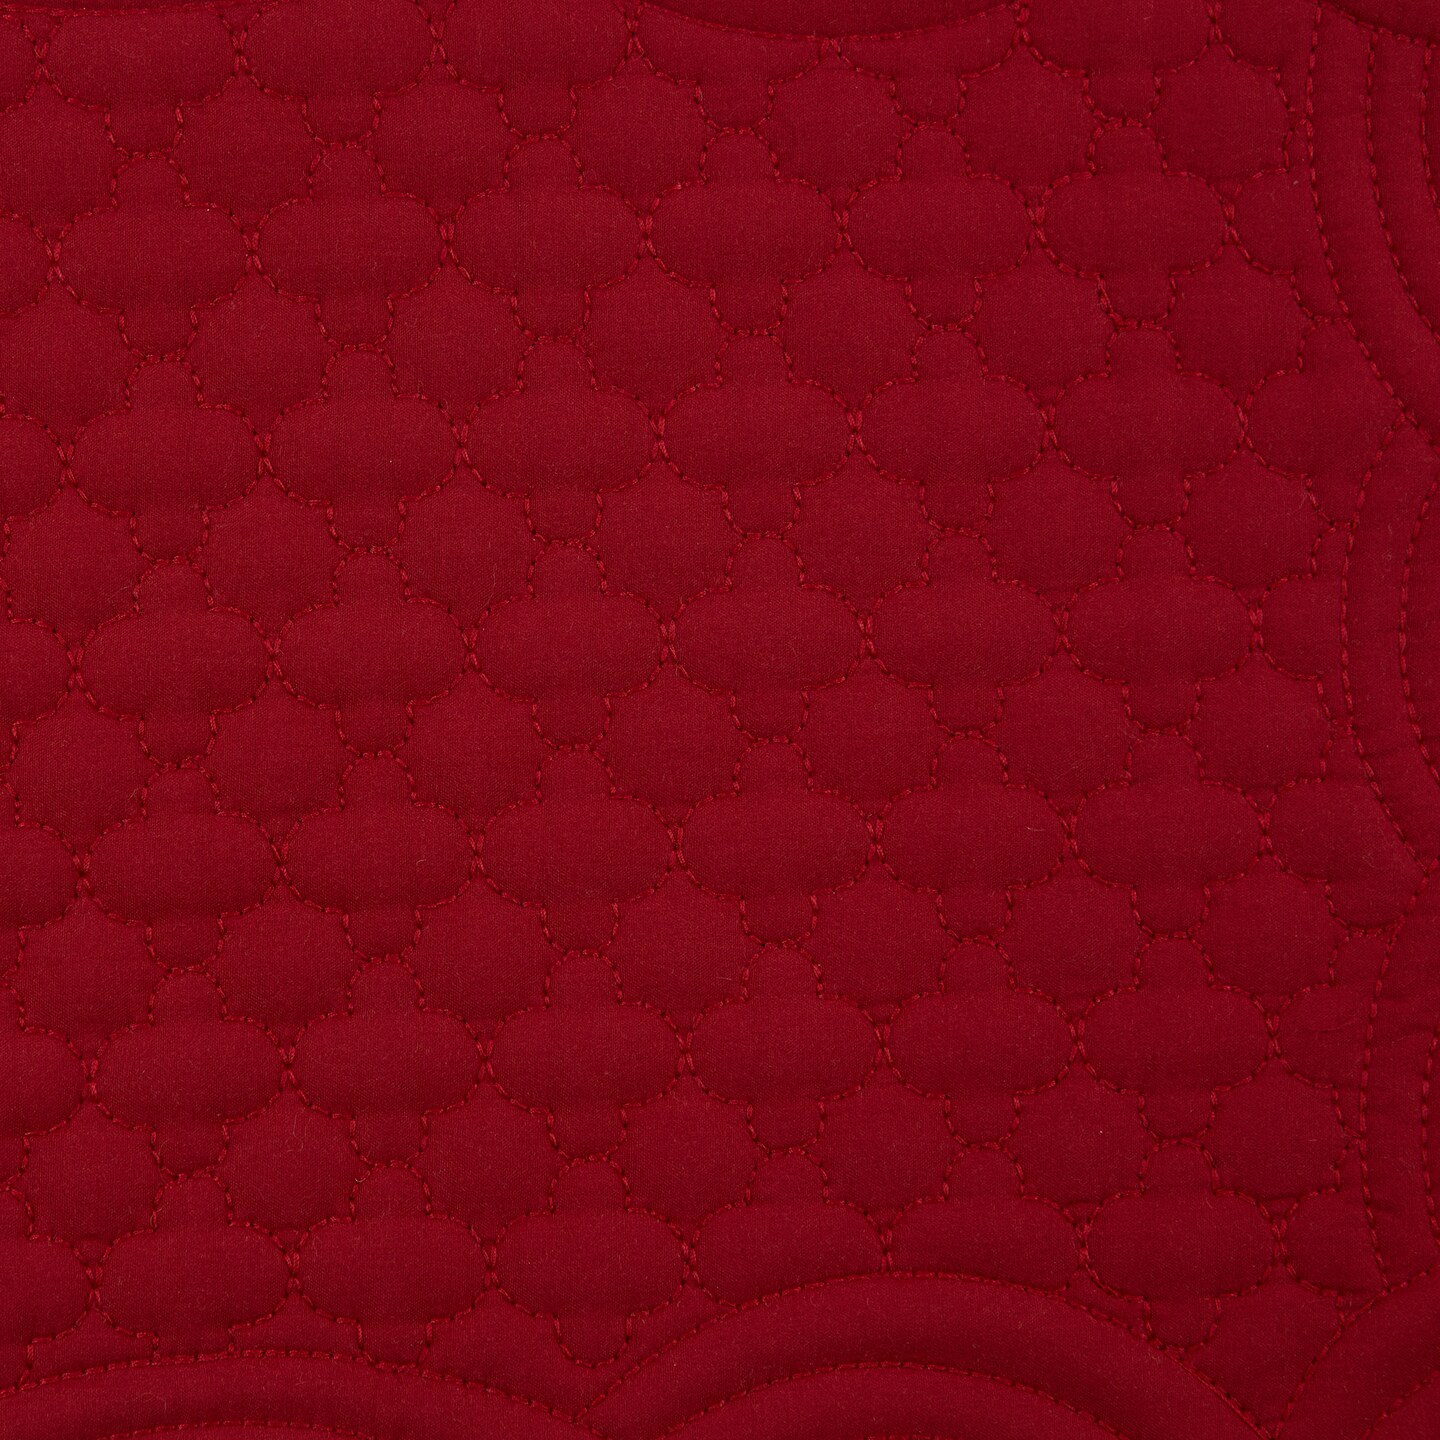 DII Cranberry Quilted Farmhouse Placemat (Set of 6)